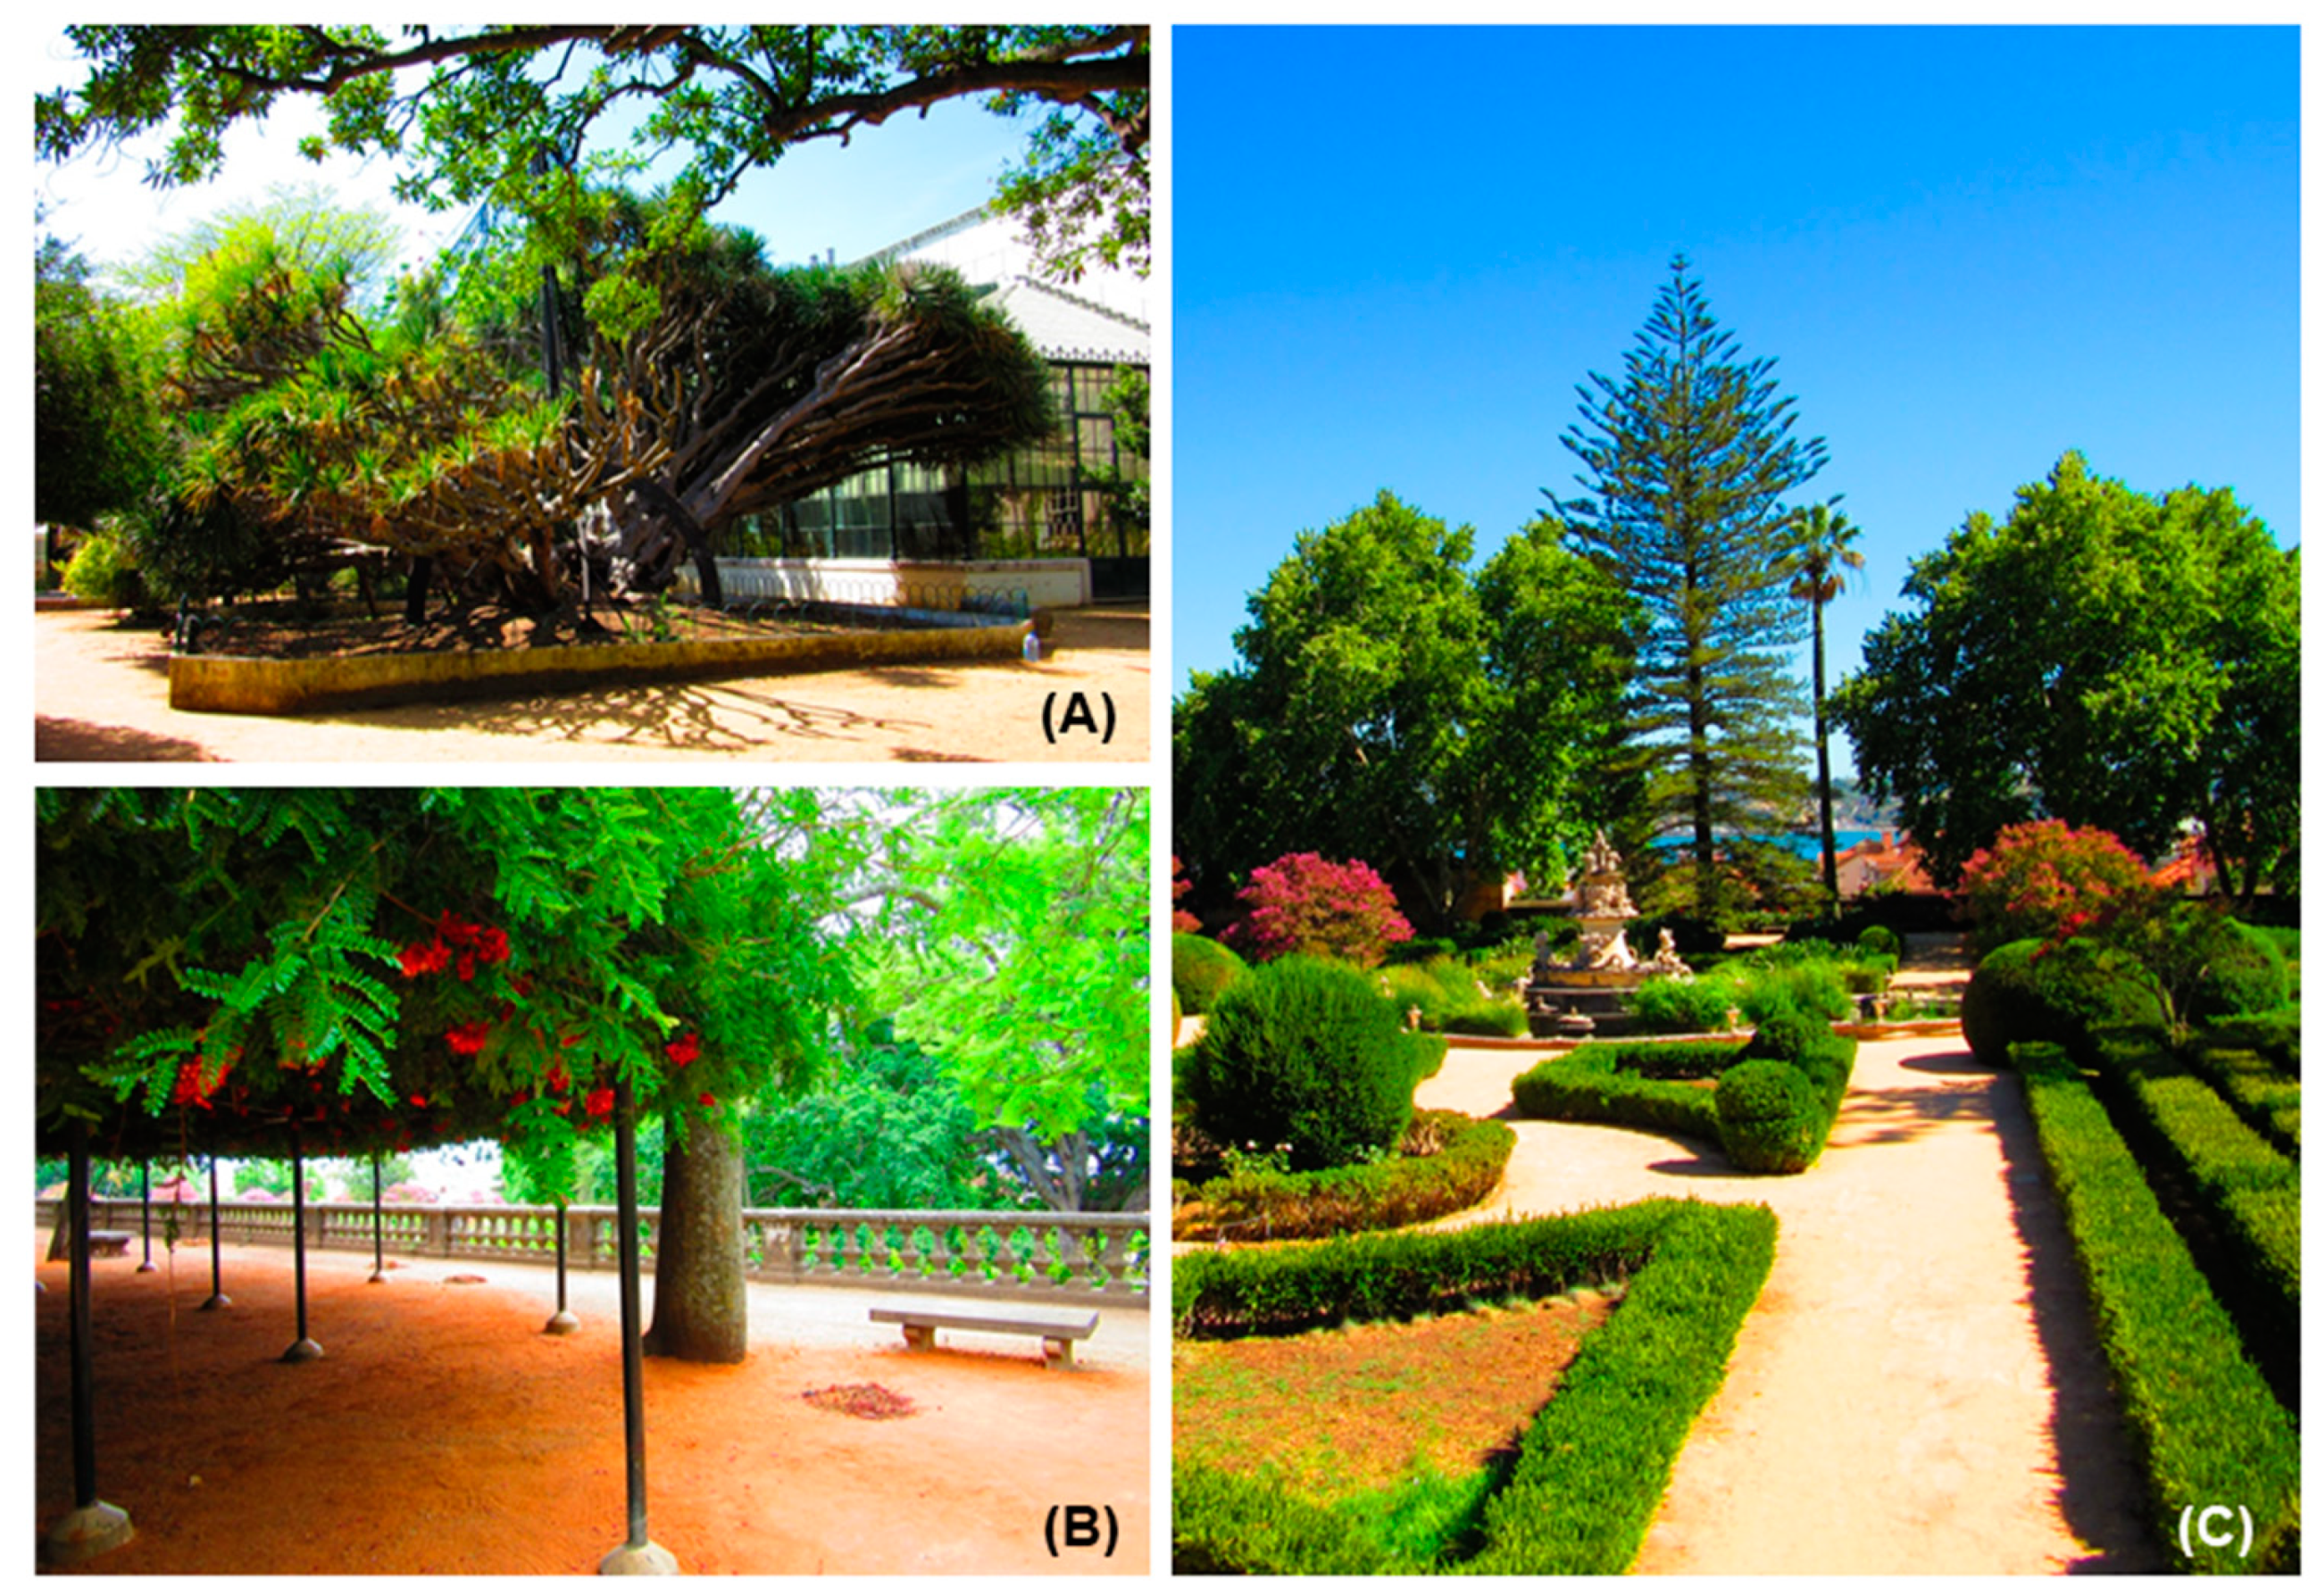 Plants Free Full Text Natural And Historical Heritage Of The Lisbon Botanical Gardens An Integrative Approach With Tree Collections Html